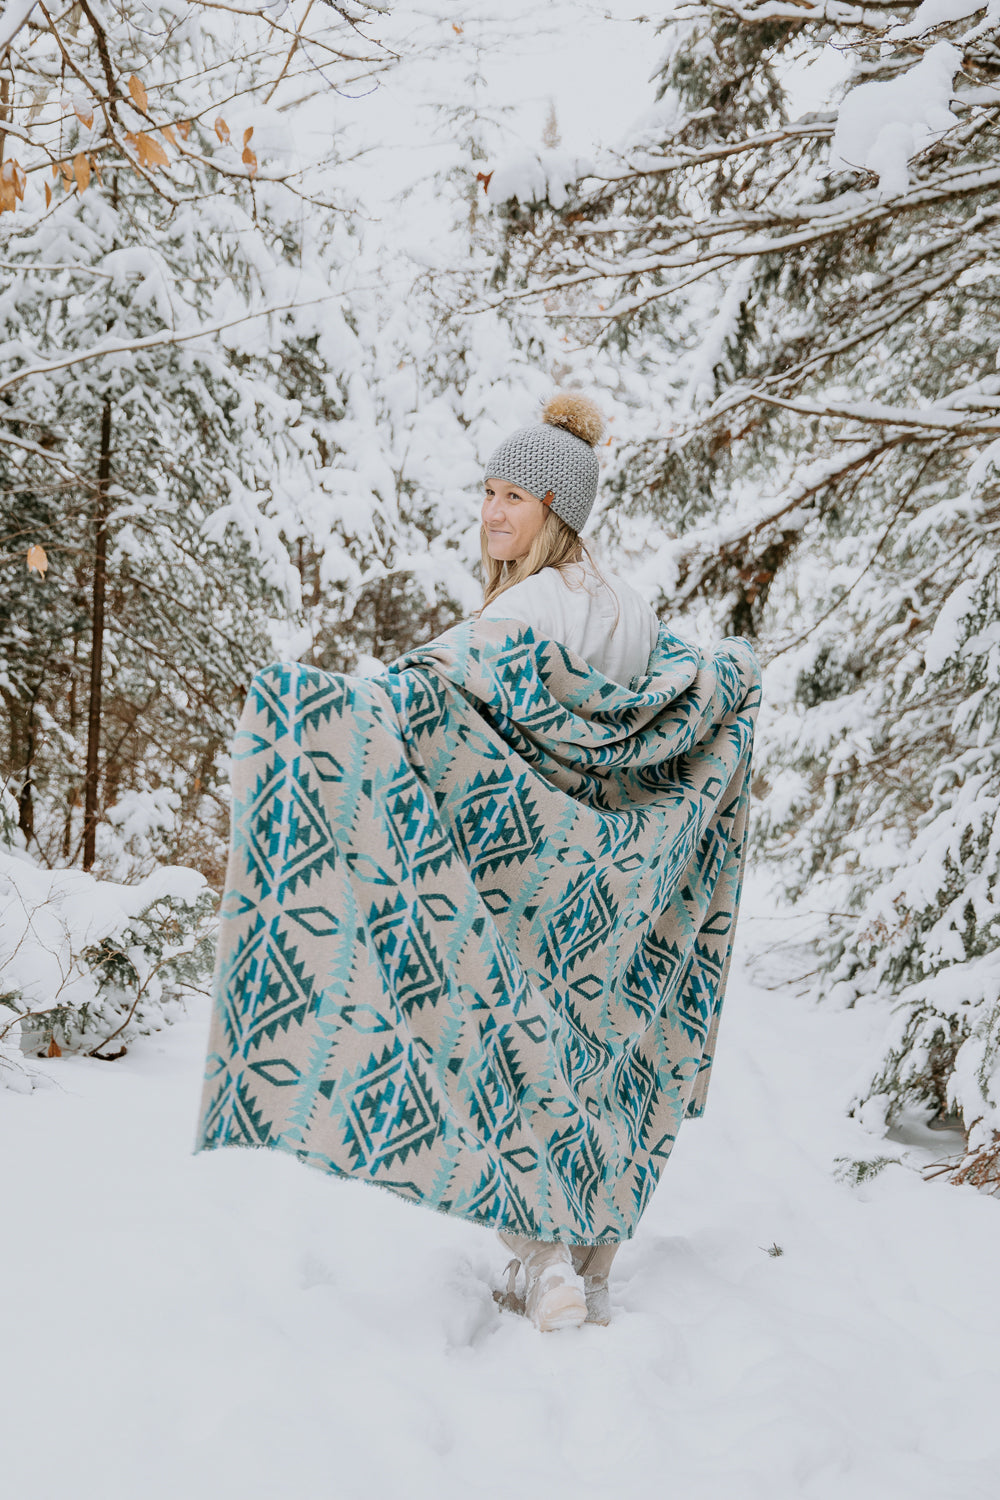 Wool Throw blanket for picnic with bohemian motif made in quebec